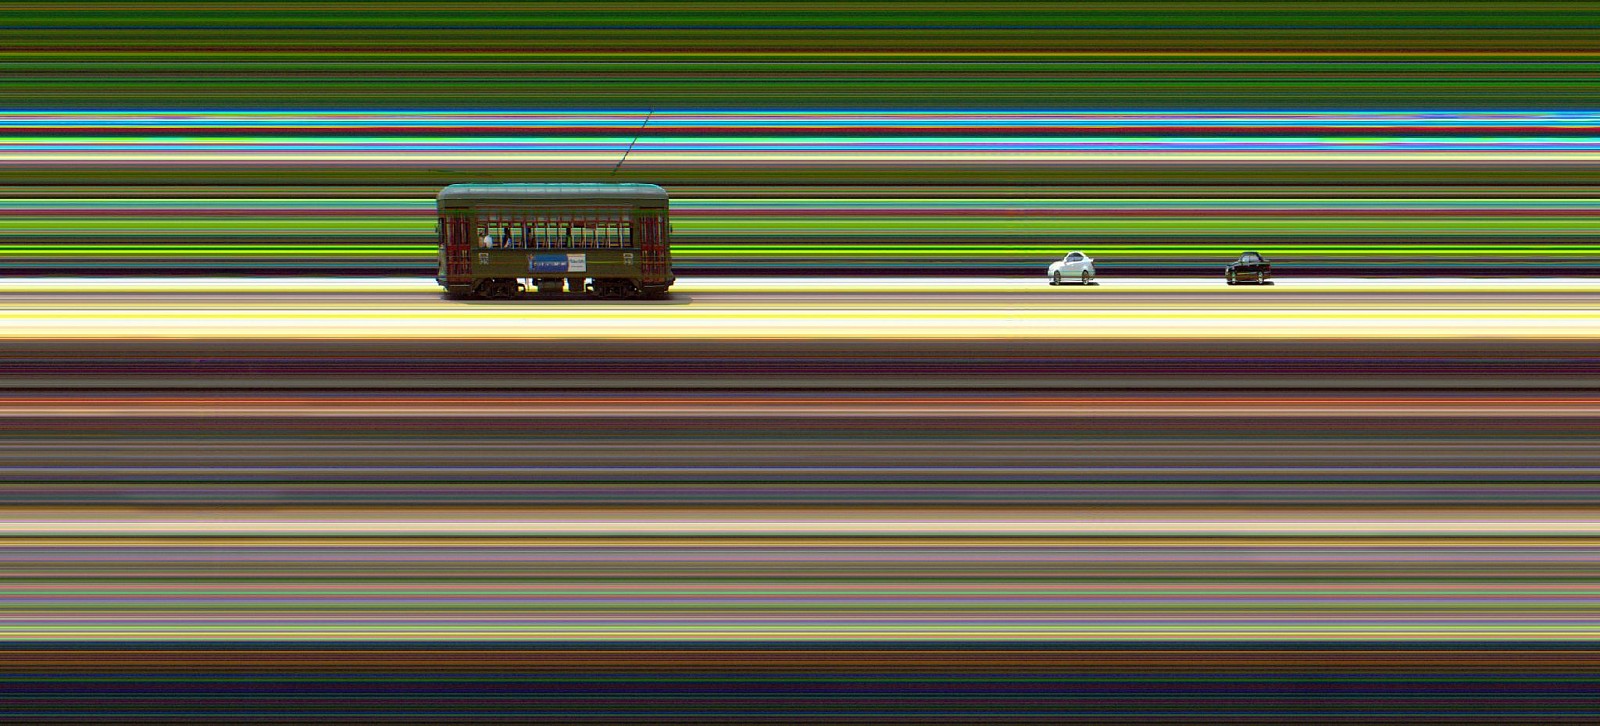 Jay Mark Johnson, UPTOWN TRAFFIC 16, 2010 New Orleans LA
archival pigment on paper, mounted on aluminum, 40 x 132 in. (101.6 x 335.3 cm)